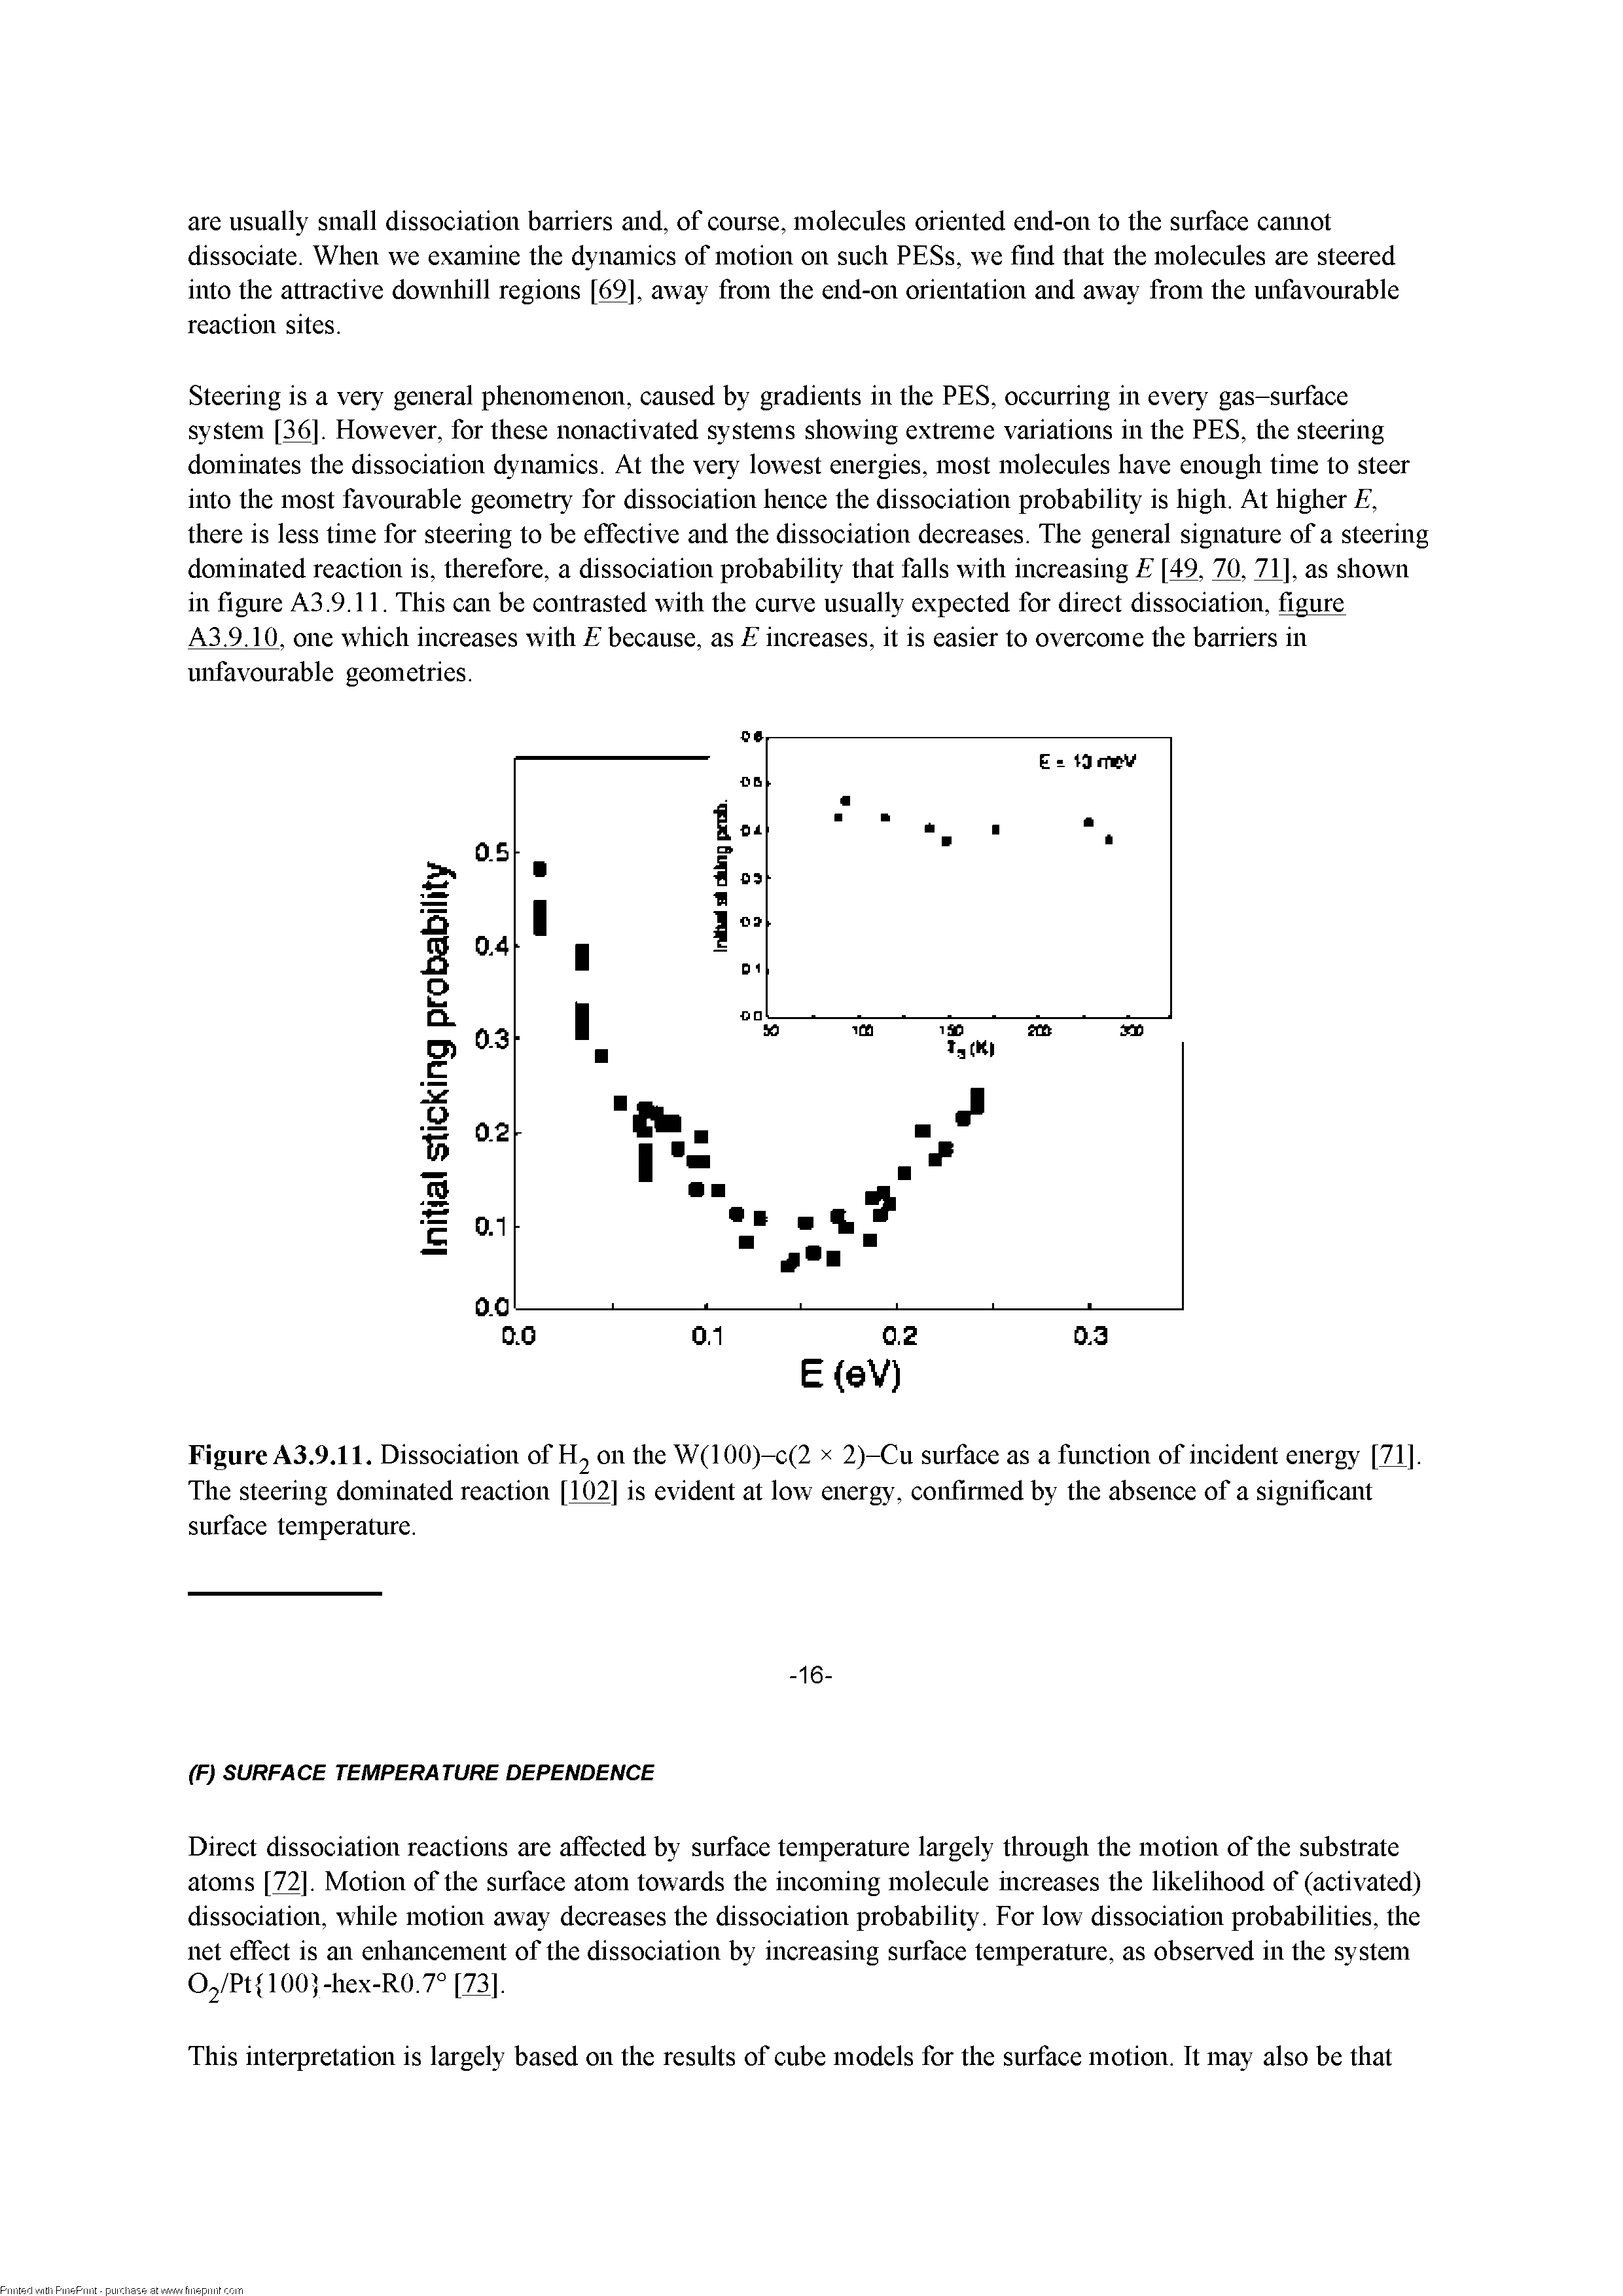 Figure A3.9.11. Dissociation of H2 on the W(100)-c(2 x 2)-Cu surface as a function of incident energy [71]. The steering dominated reaction [102] is evident at low energy, confmned by the absence of a significant surface temperature.